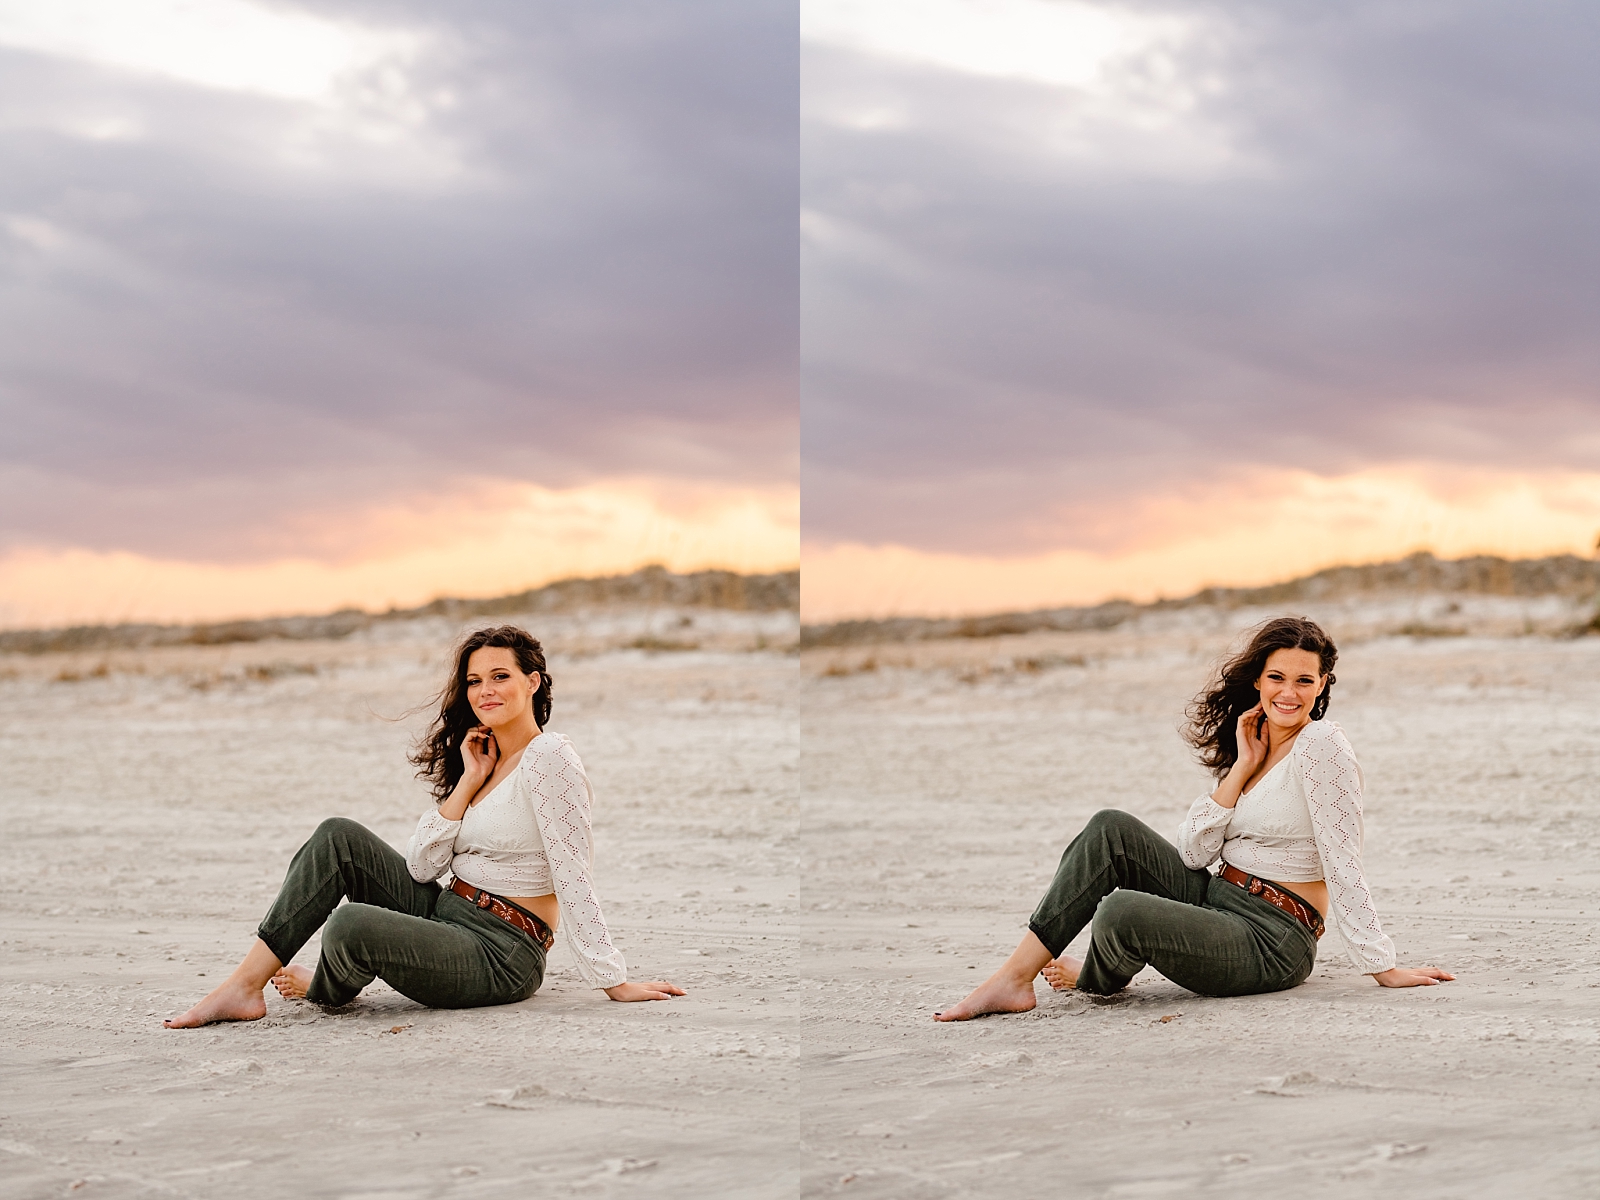 Golden hour on the beach in St Augustine of high school senior at sunset.